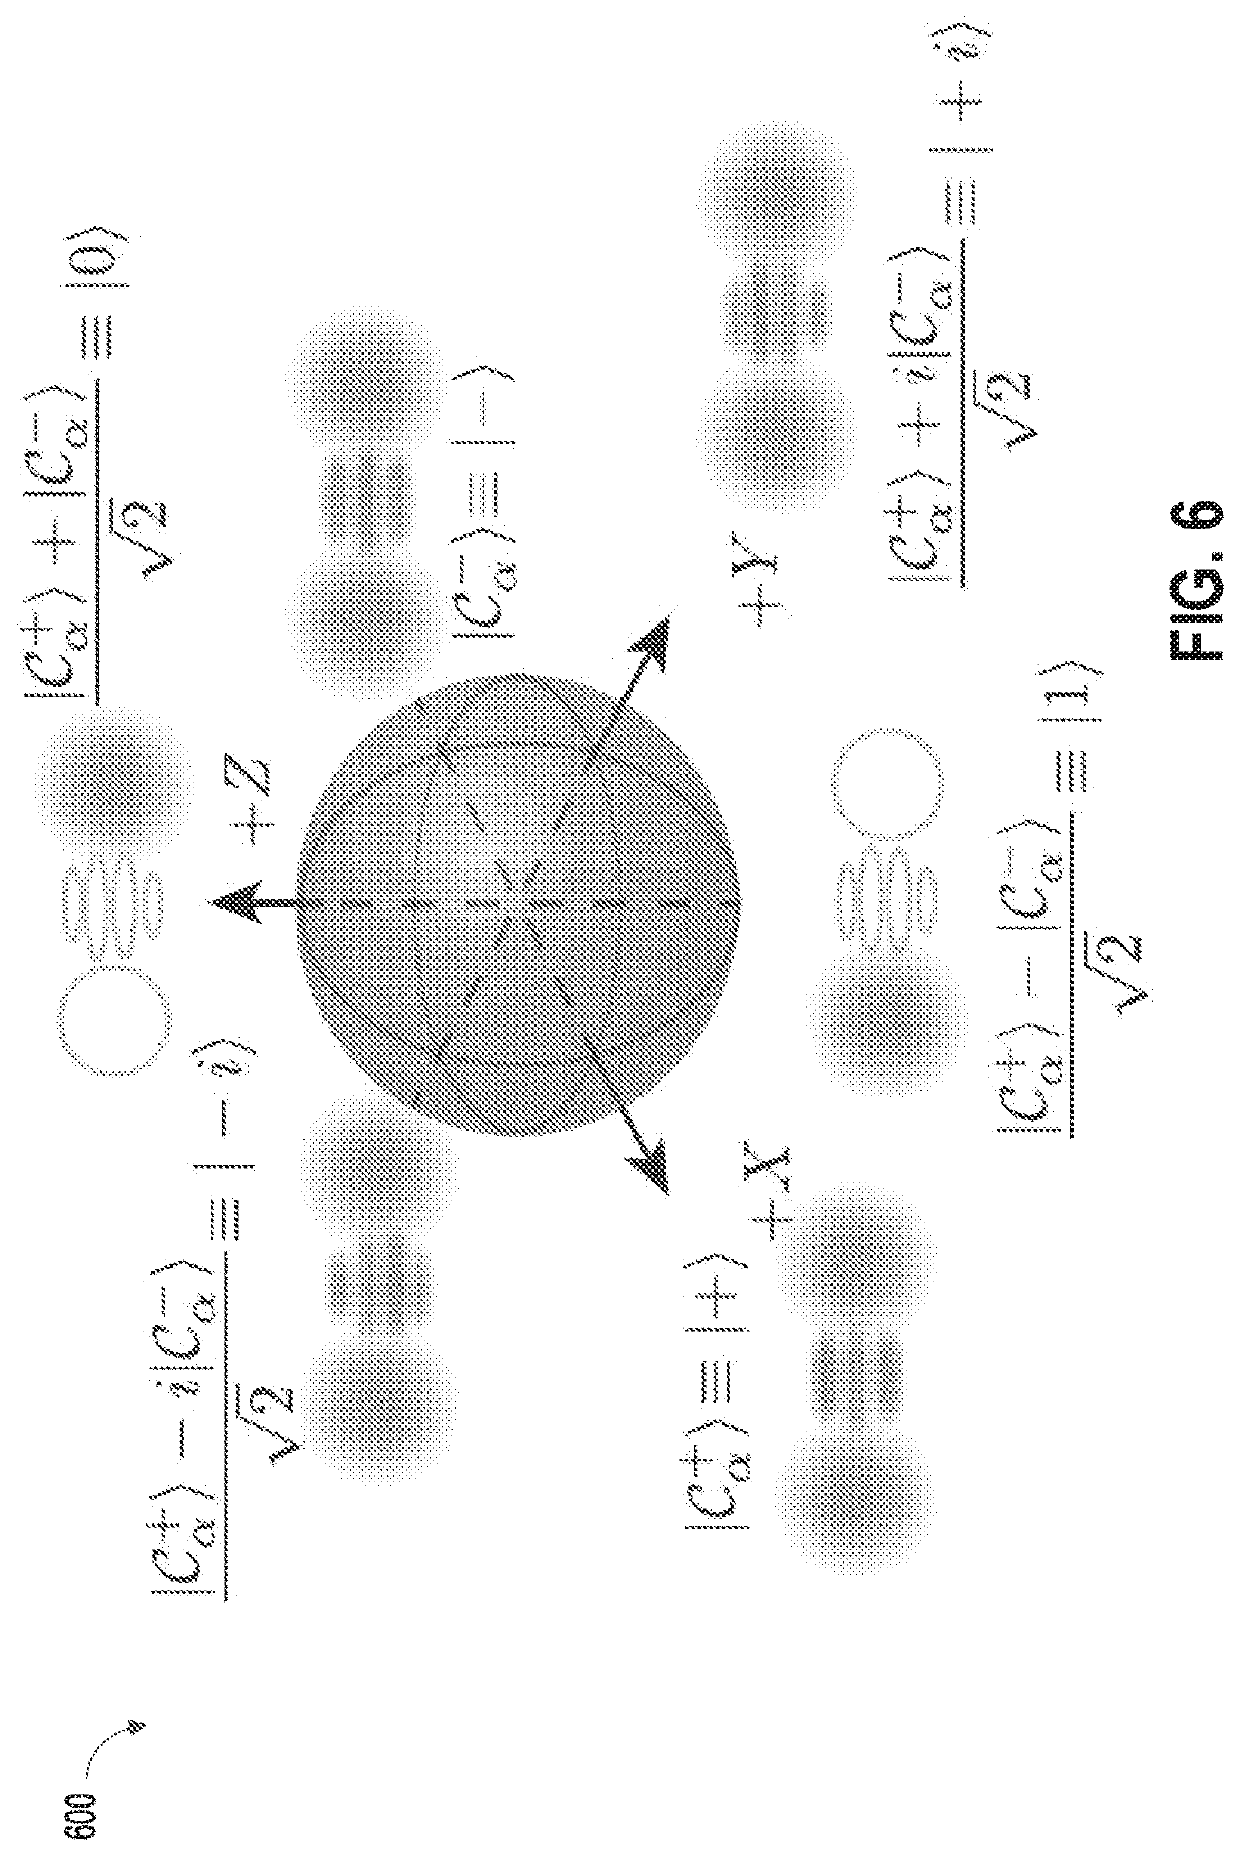 Quantum information processing with an asymmetric error channel